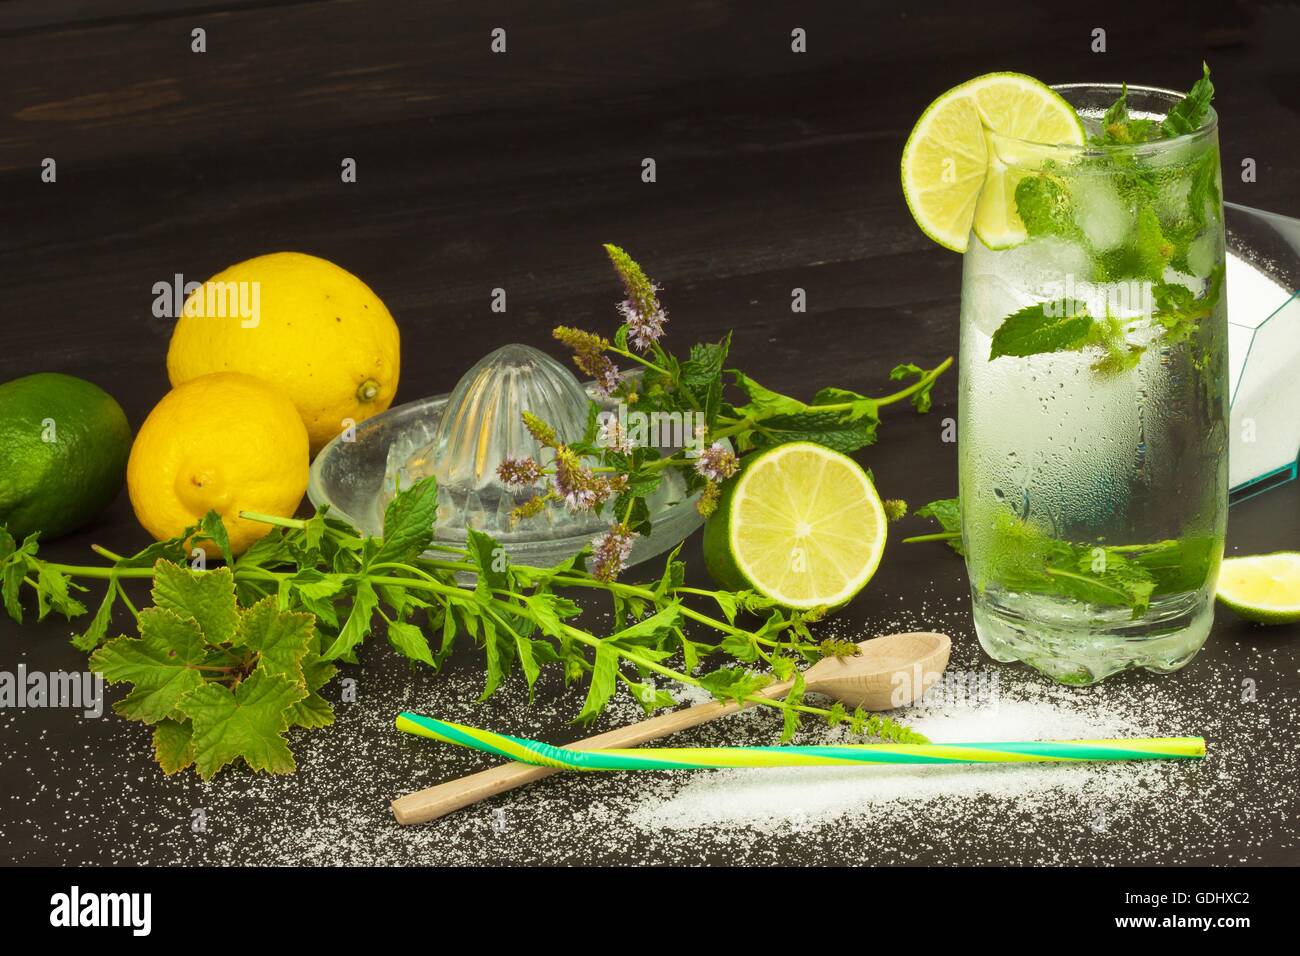 Homemade lemonade with fresh lemon and mint. Cool, refreshing dip in the hot summer. Stock Photo